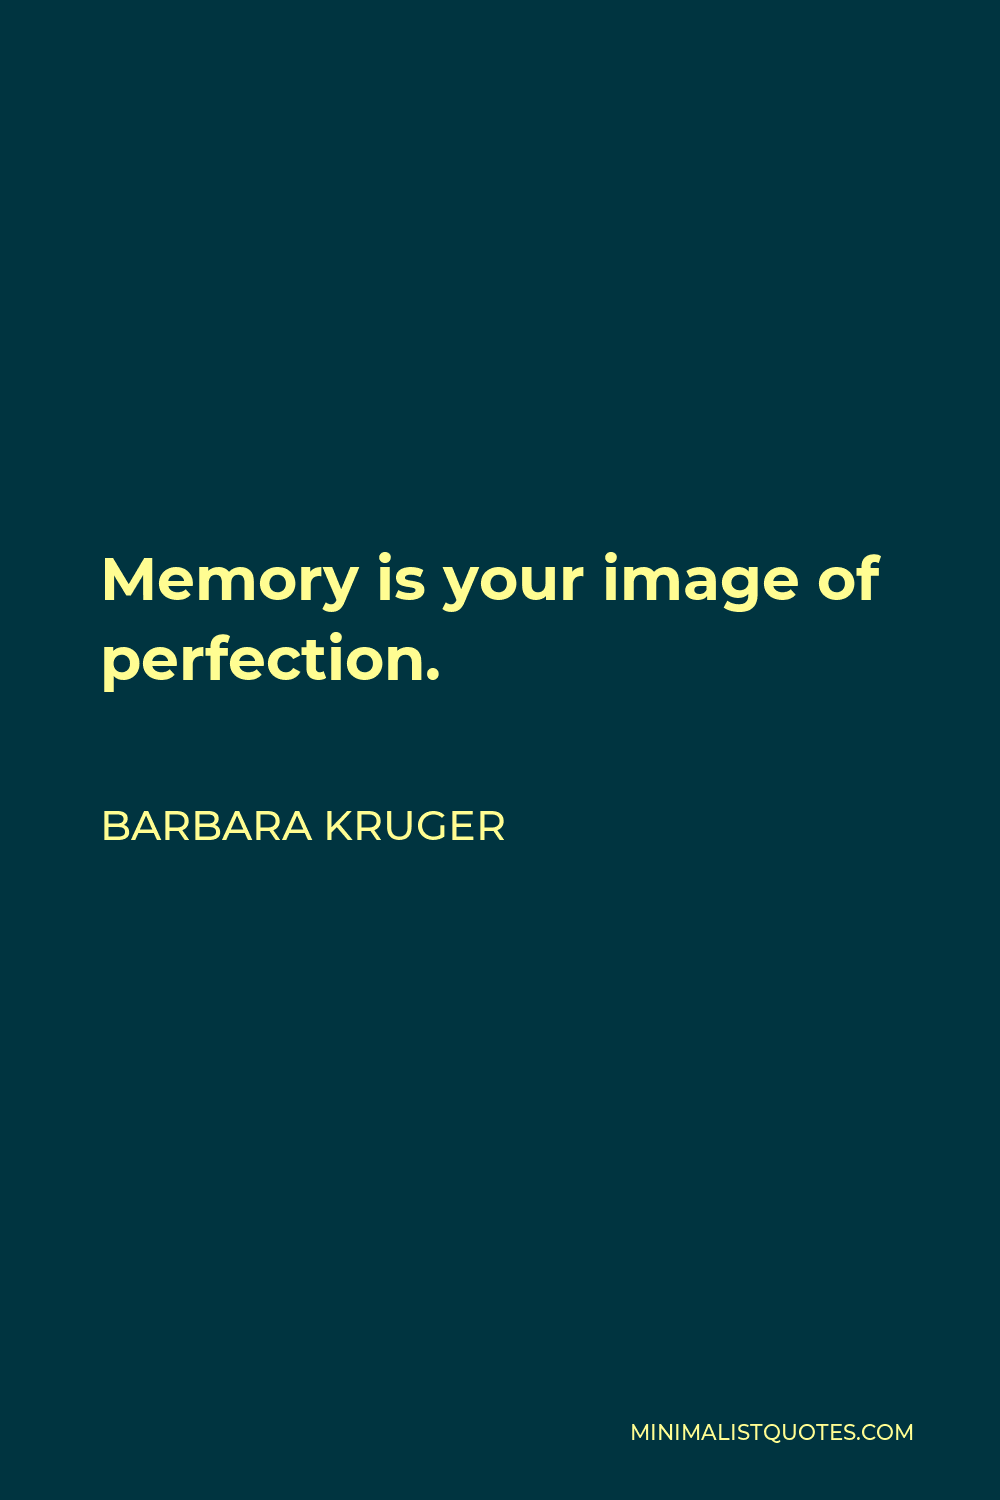 Barbara Kruger Quote - Memory is your image of perfection.